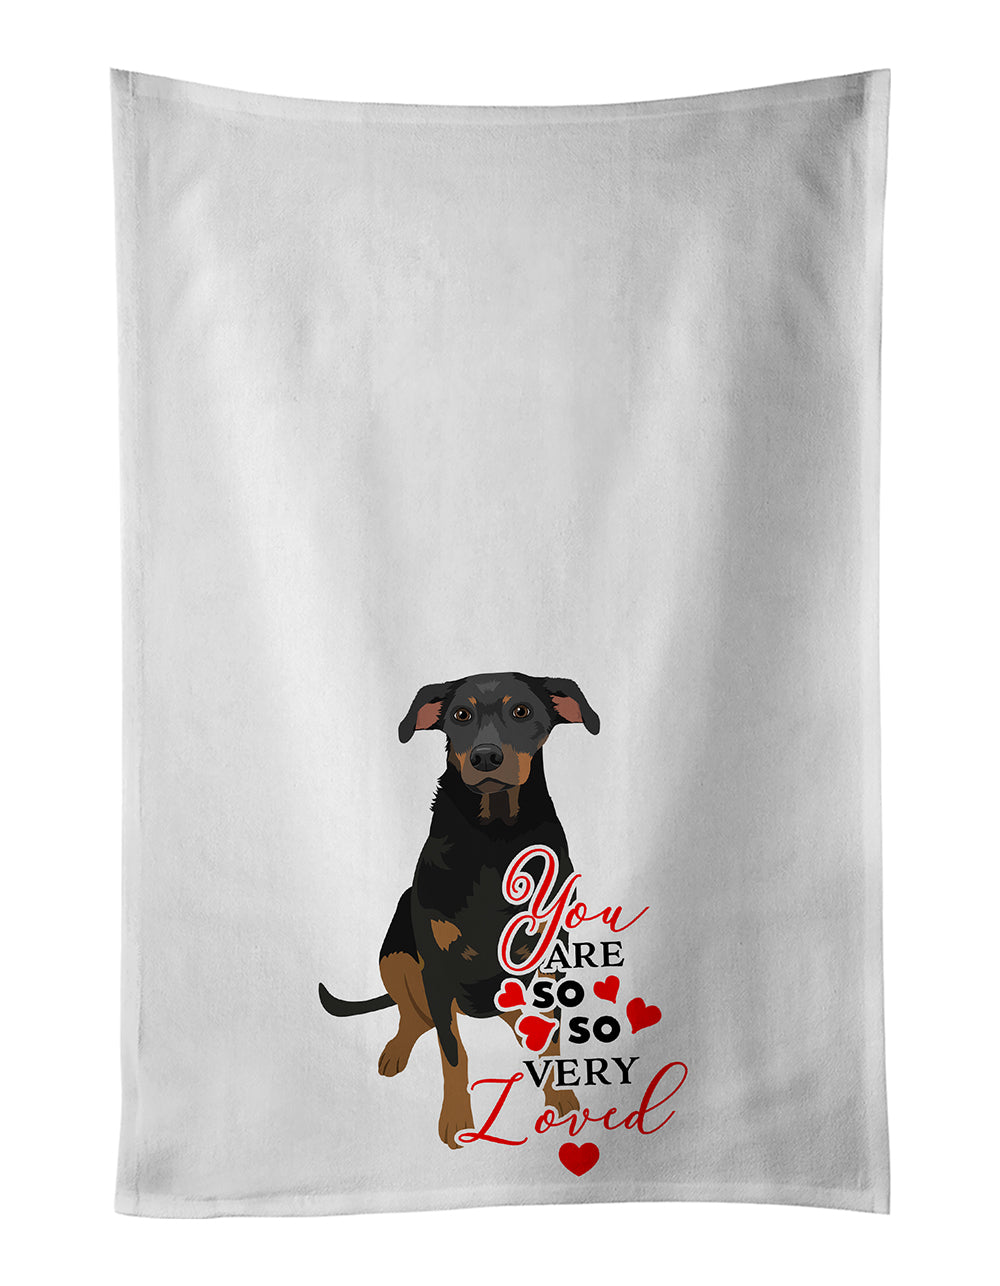 Buy this Rottweiler Black and Tan #5 so Loved White Kitchen Towel Set of 2